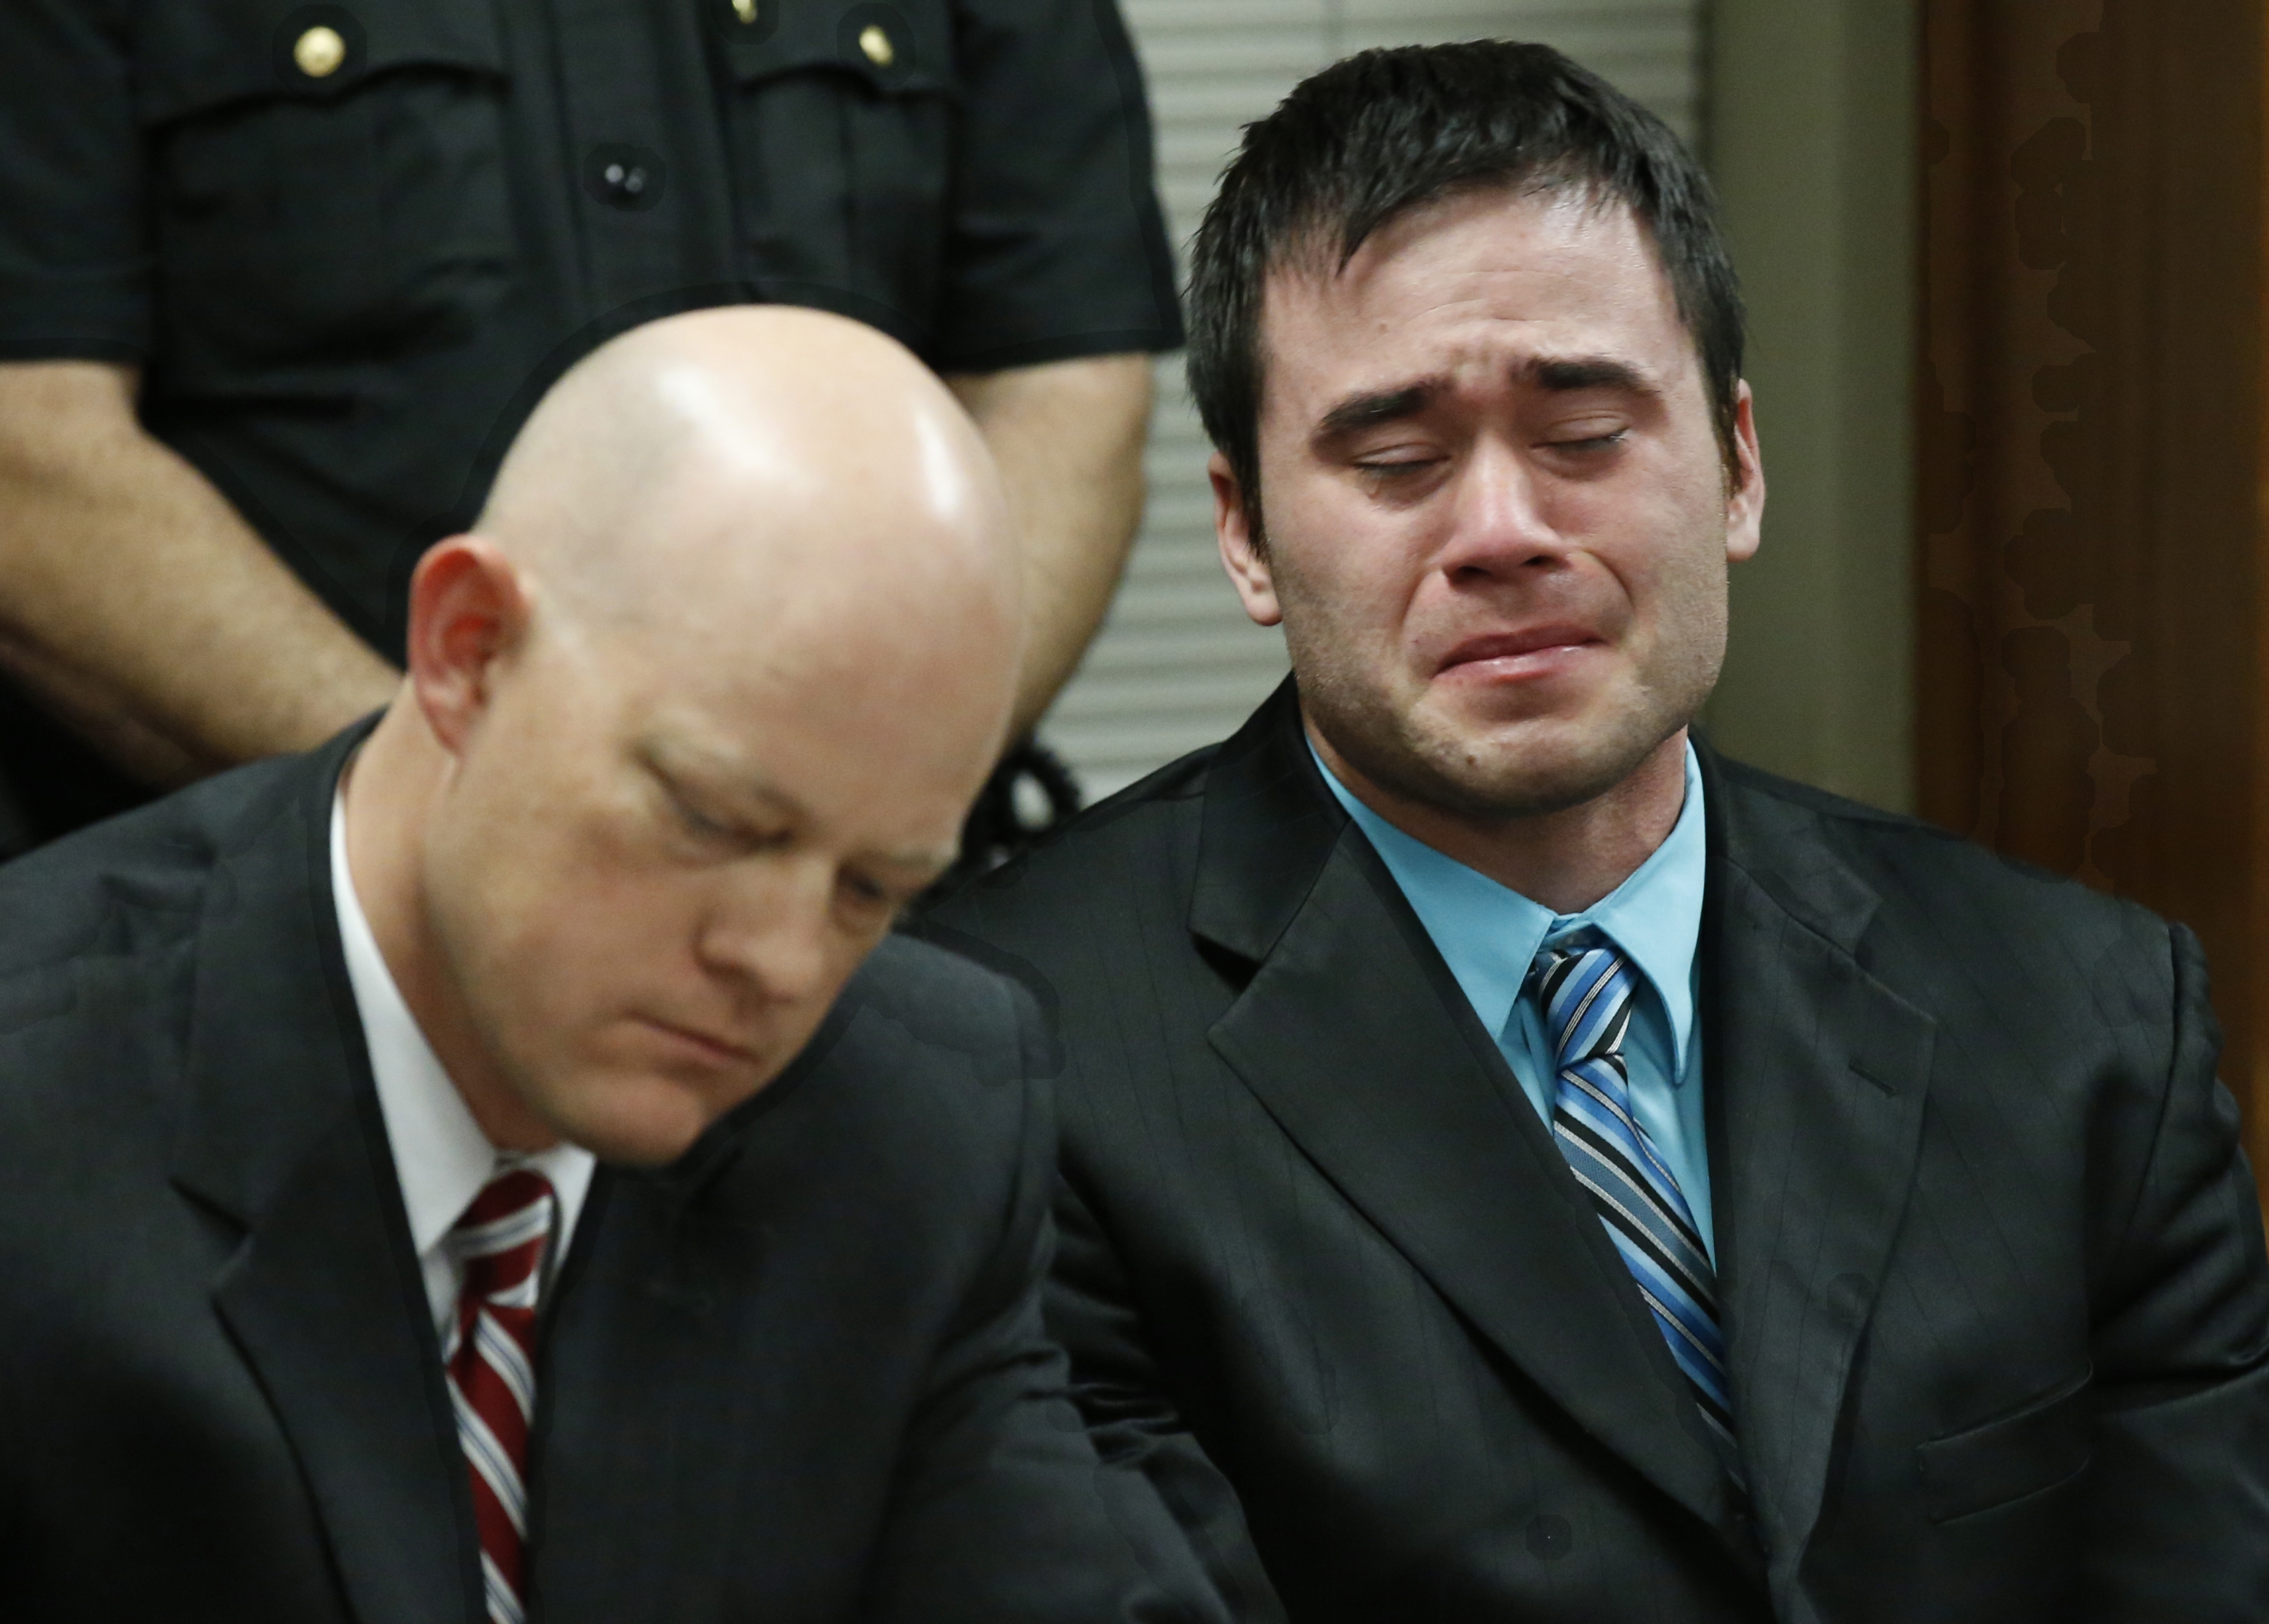 Daniel Holtzclaw, right, cries as the verdicts are read in his trial in Oklahoma City on Dec. 10, 2015. (Sue Ogrocki—AP)